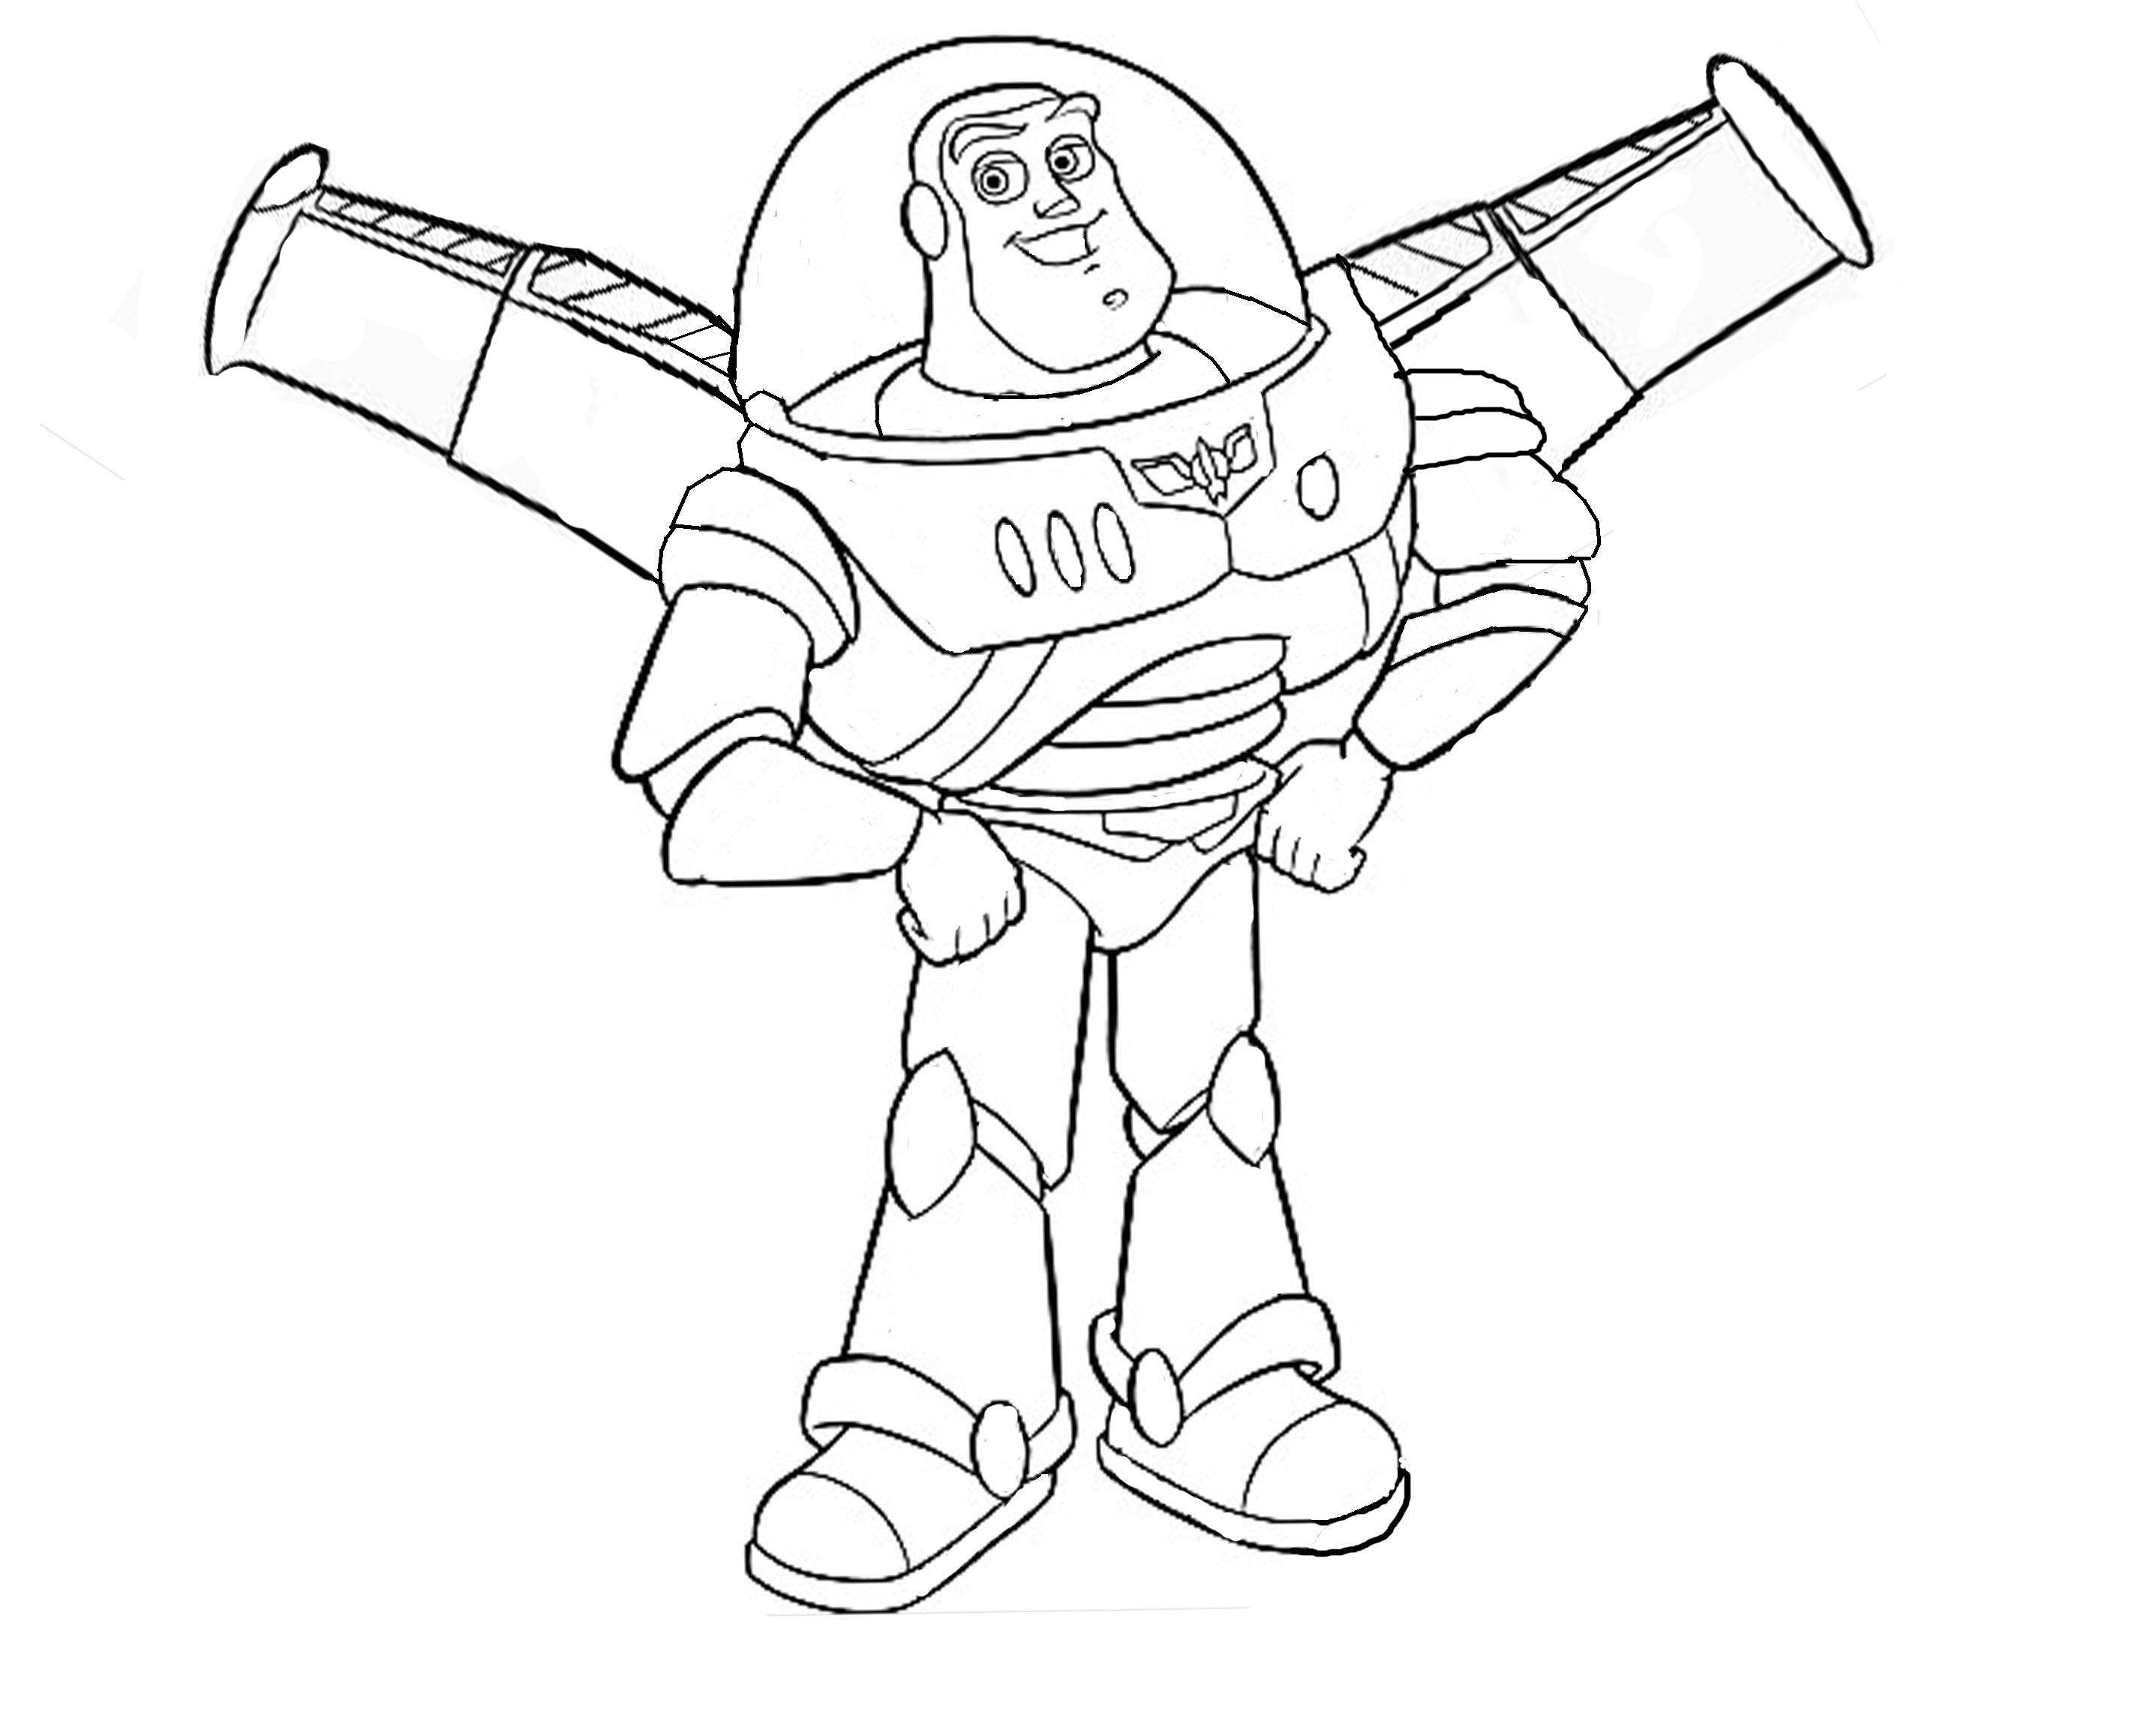 Buzz Lightyear with his wings Toy Story Kids Coloring Pages